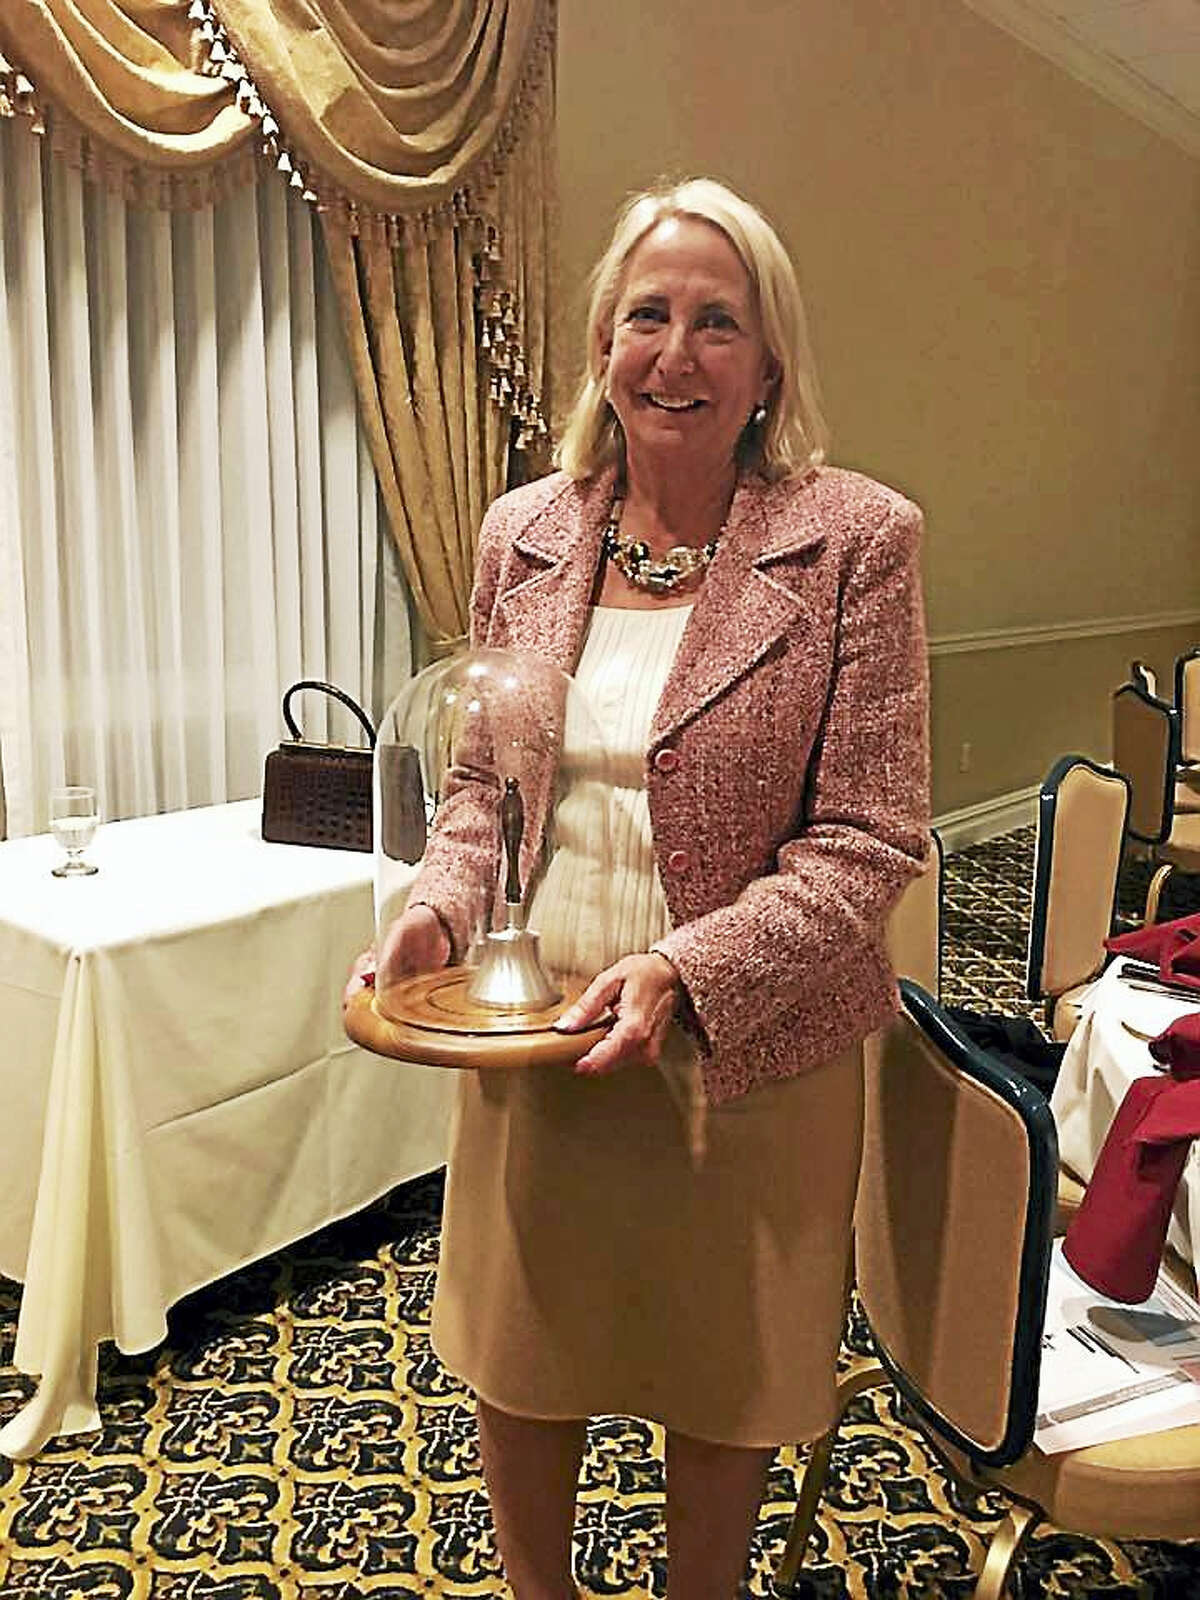 Contributed photoState Rep. Roberta Willis was honored by the Litchfield County Board of Realtors and the Connecticut Homebuilders Association for her many years as a legislator.